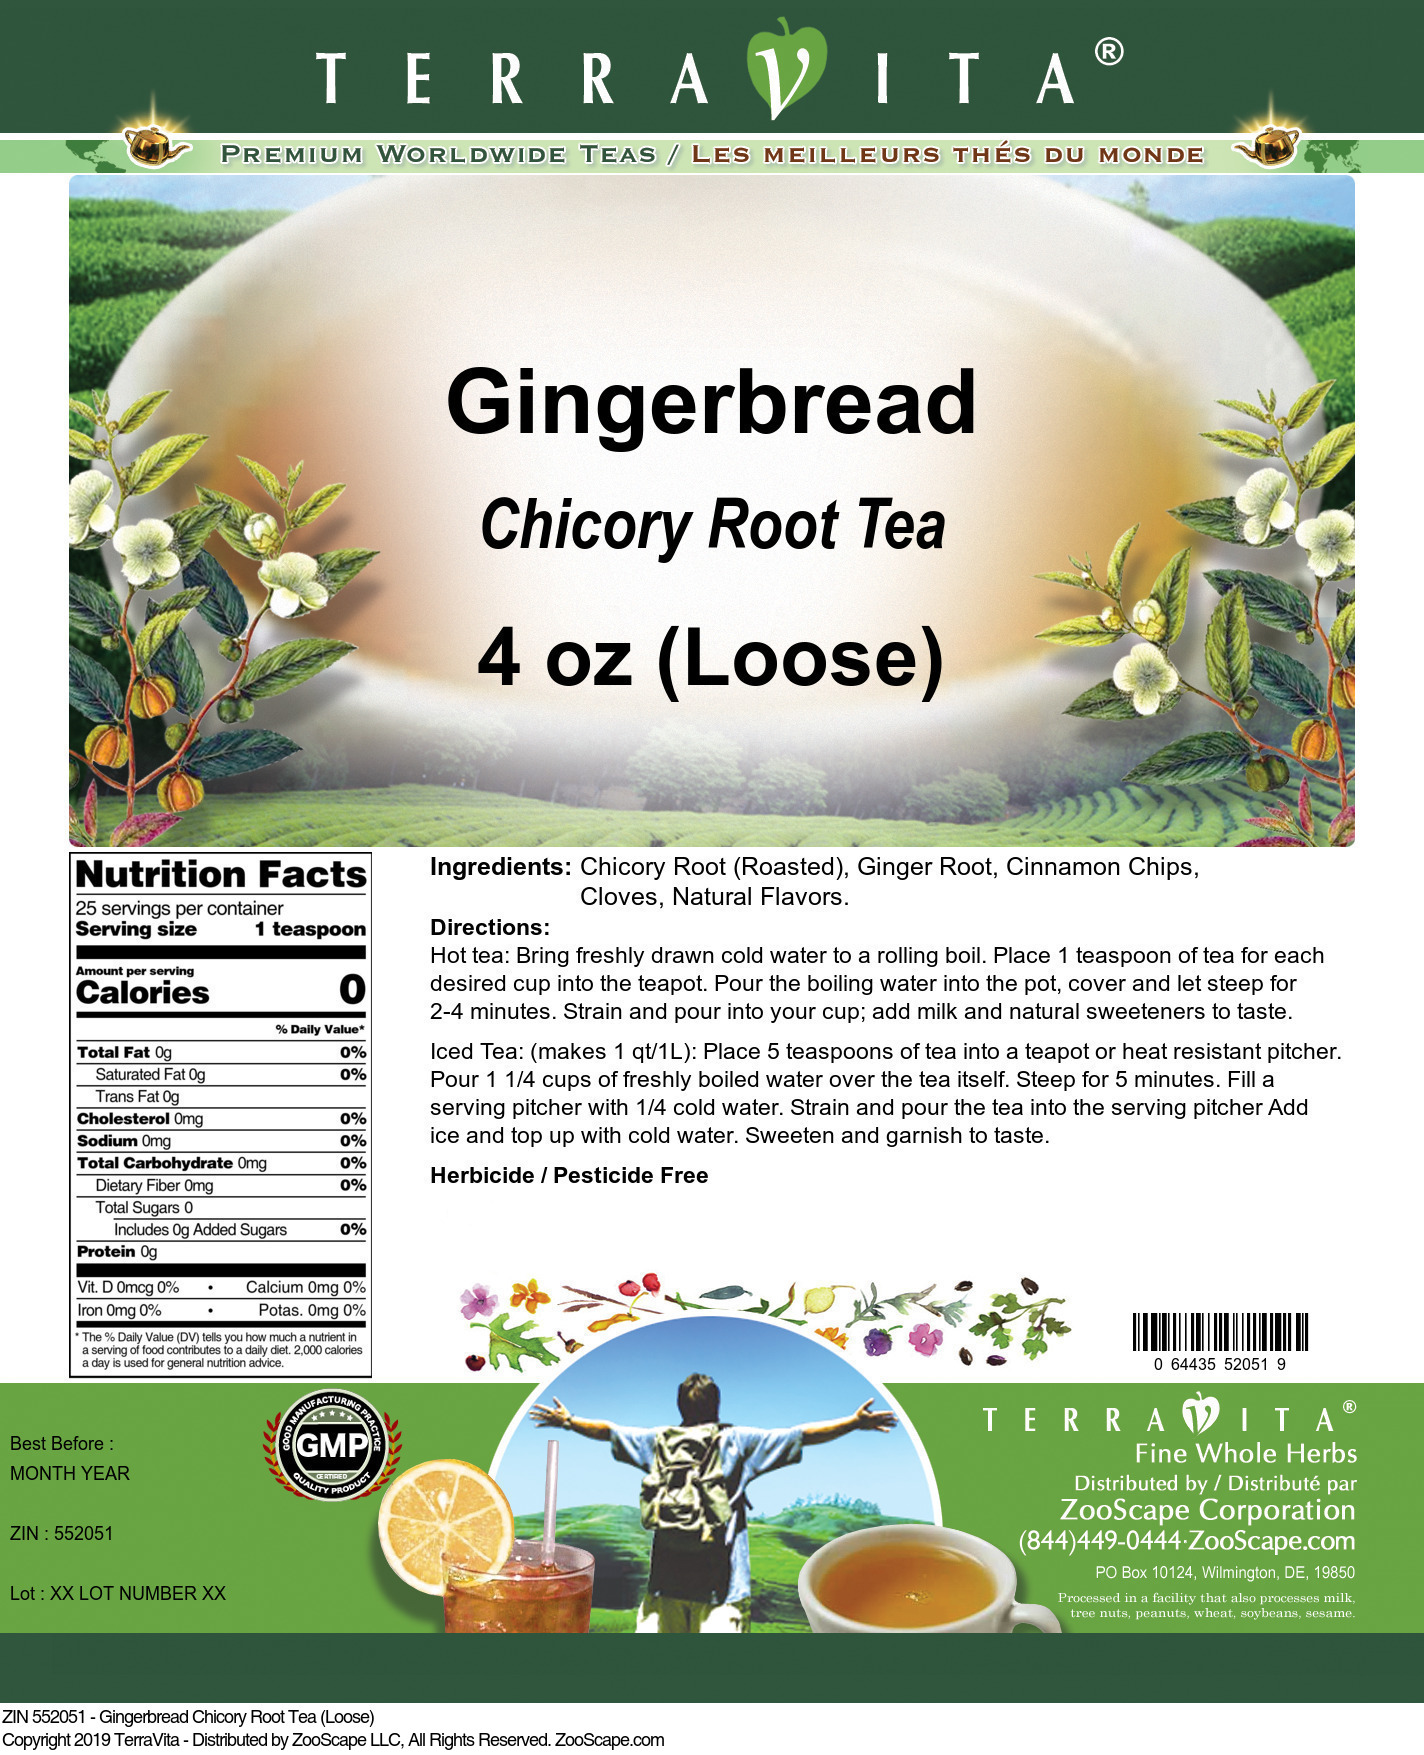 Gingerbread Chicory Root Tea (Loose) - Label